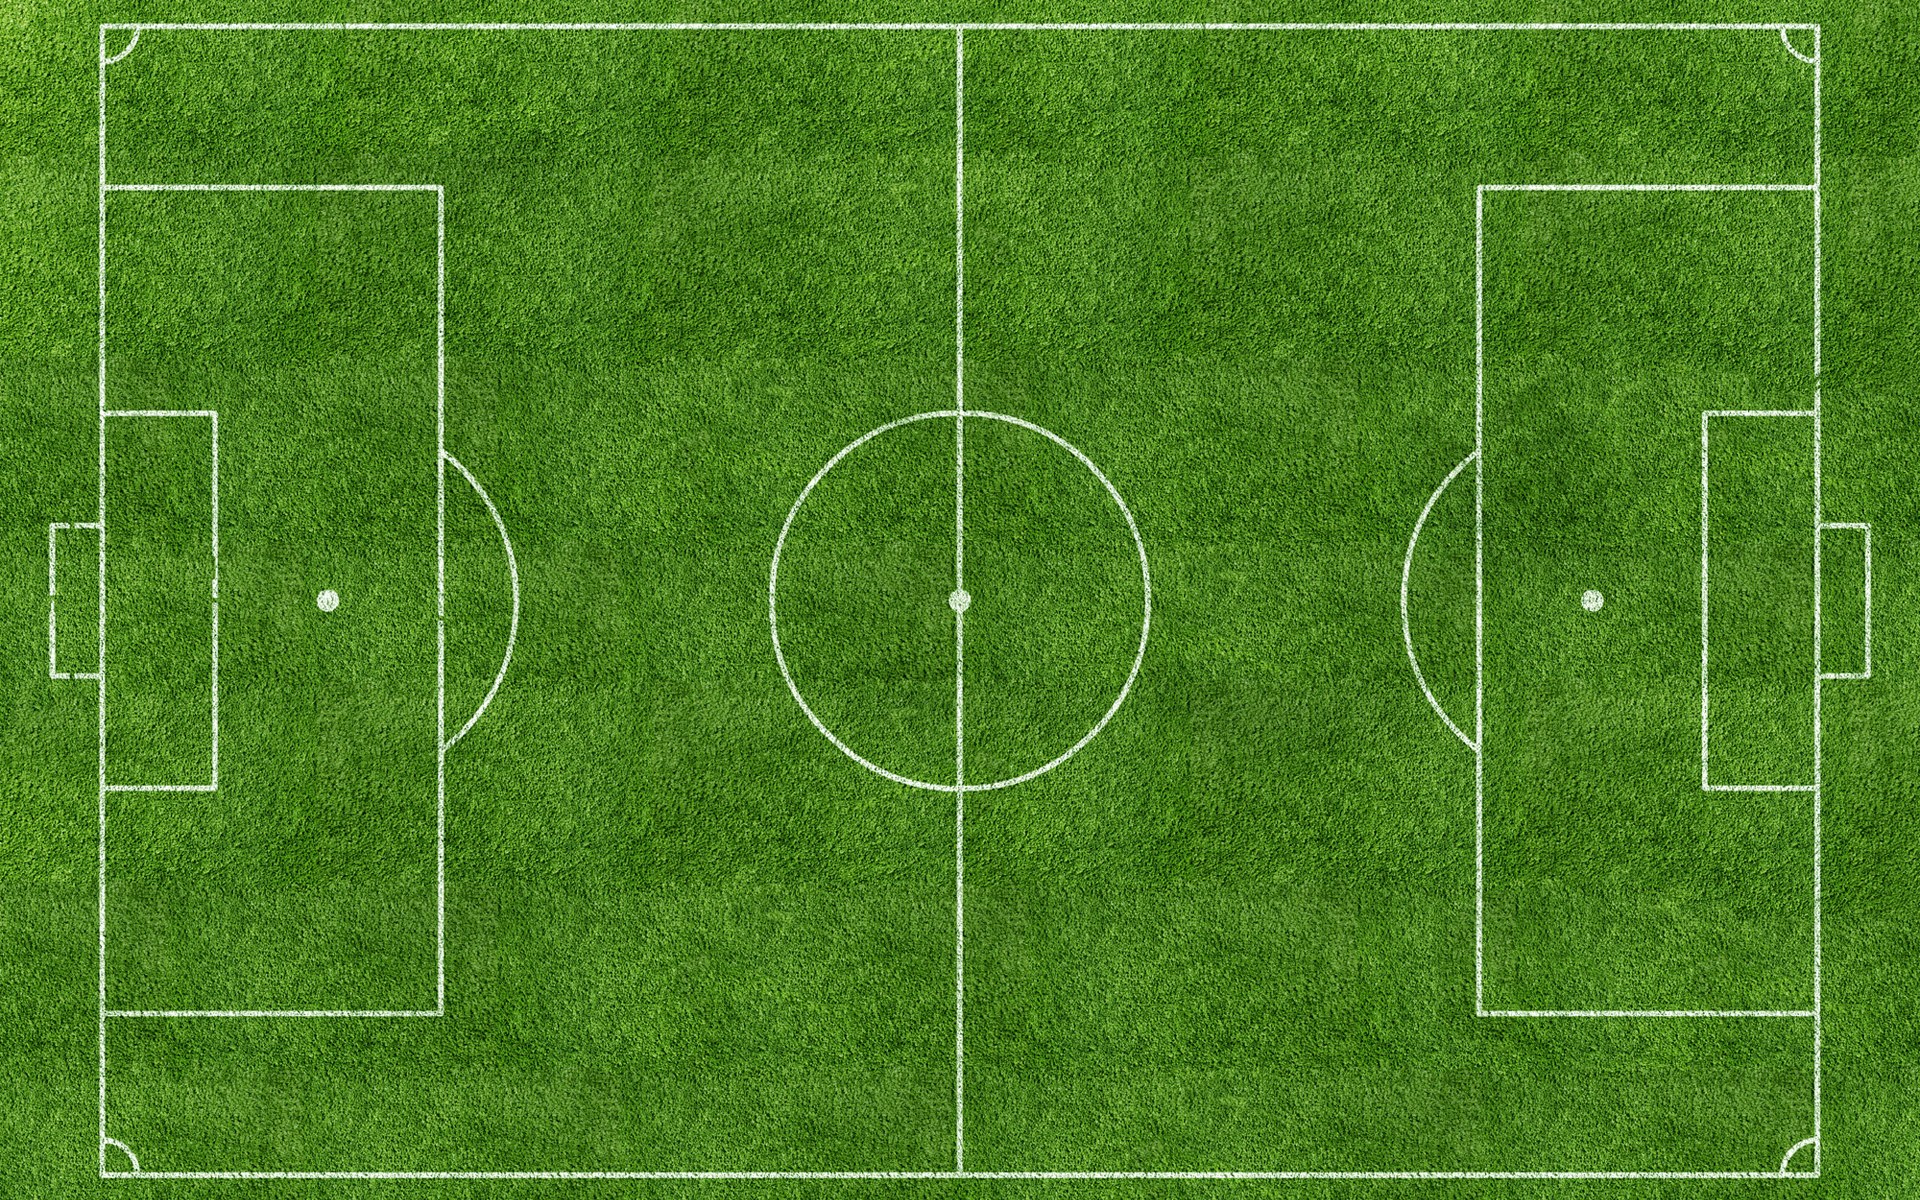 clipart of a football field - photo #17